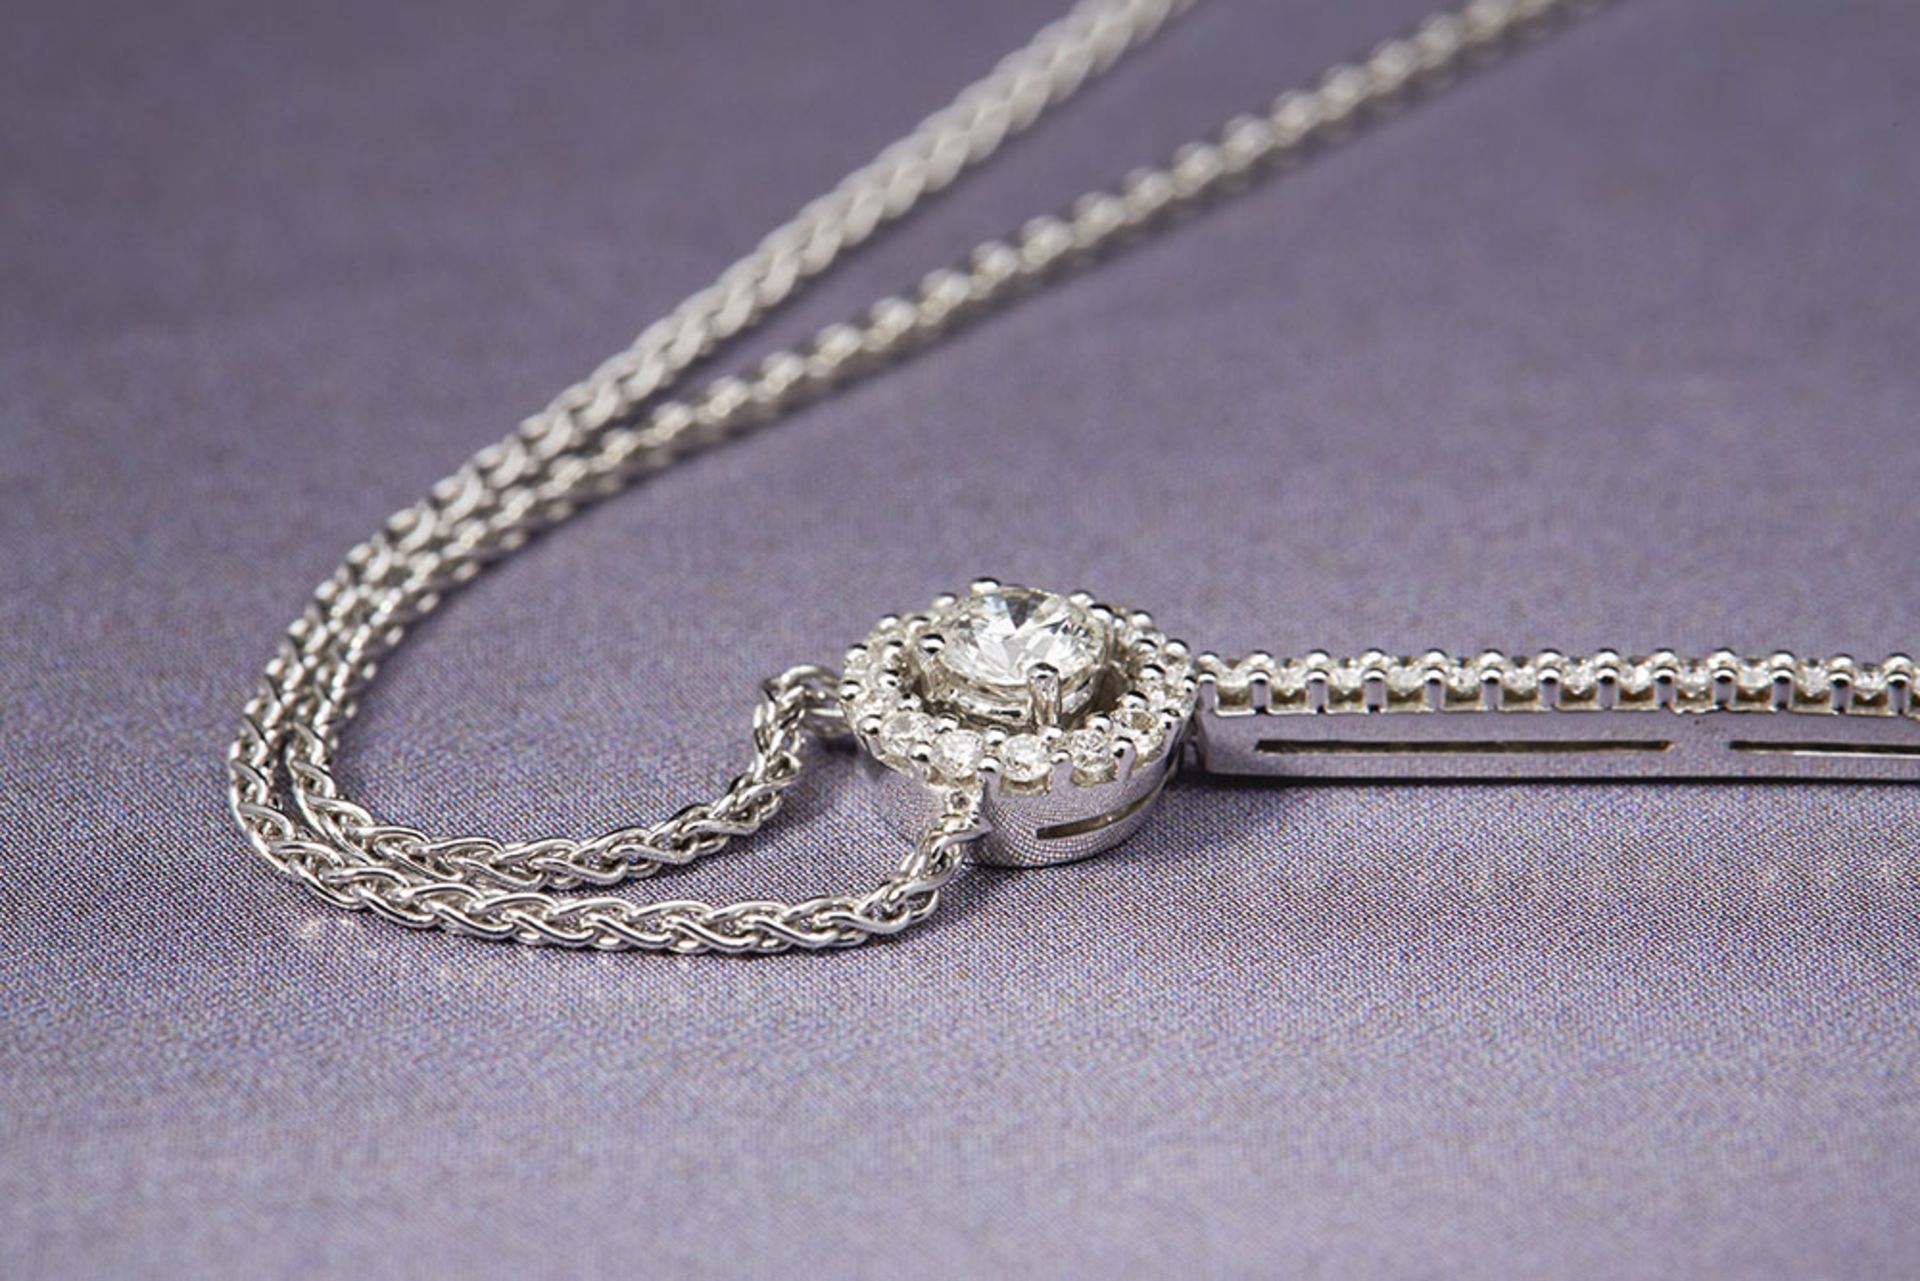 18k White Gold 2.42ct Diamond Drop Necklace - Image 3 of 6